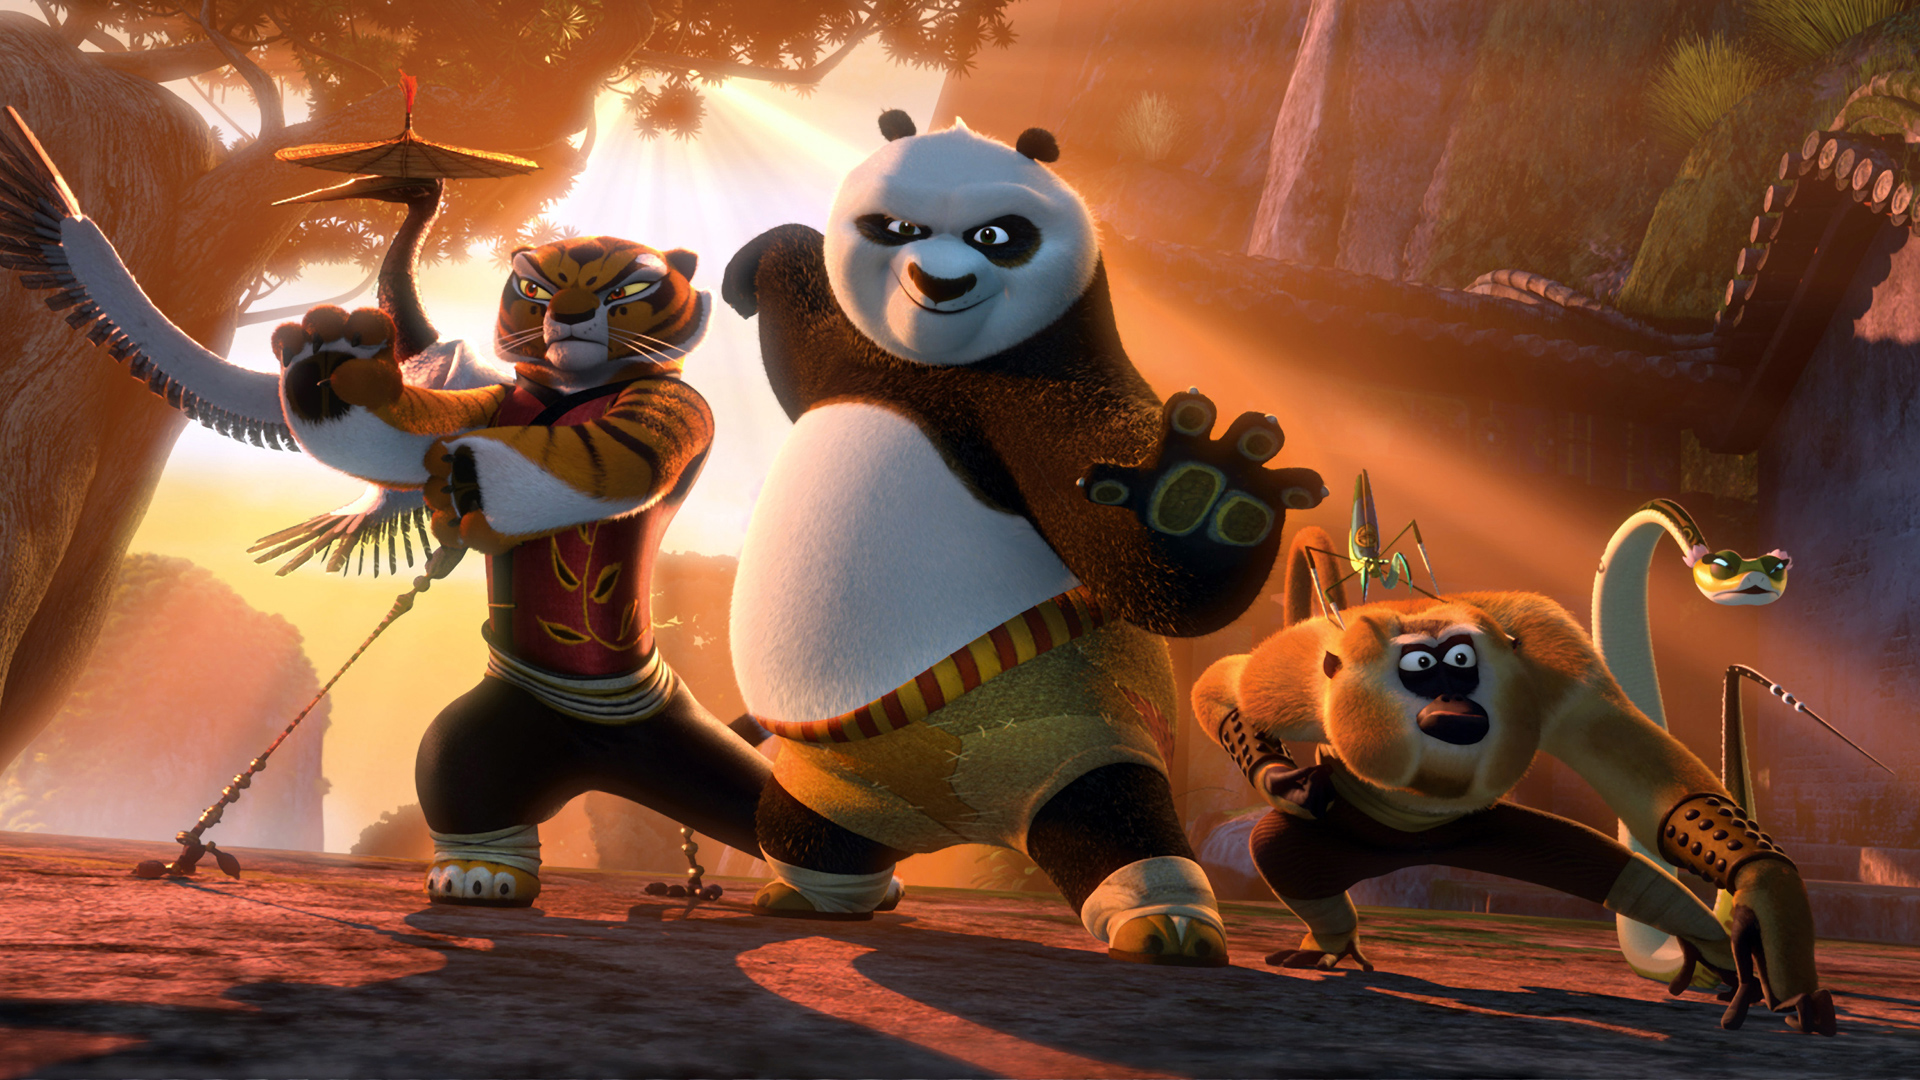 Amazing Kung Fu Panda 2 Pictures & Backgrounds